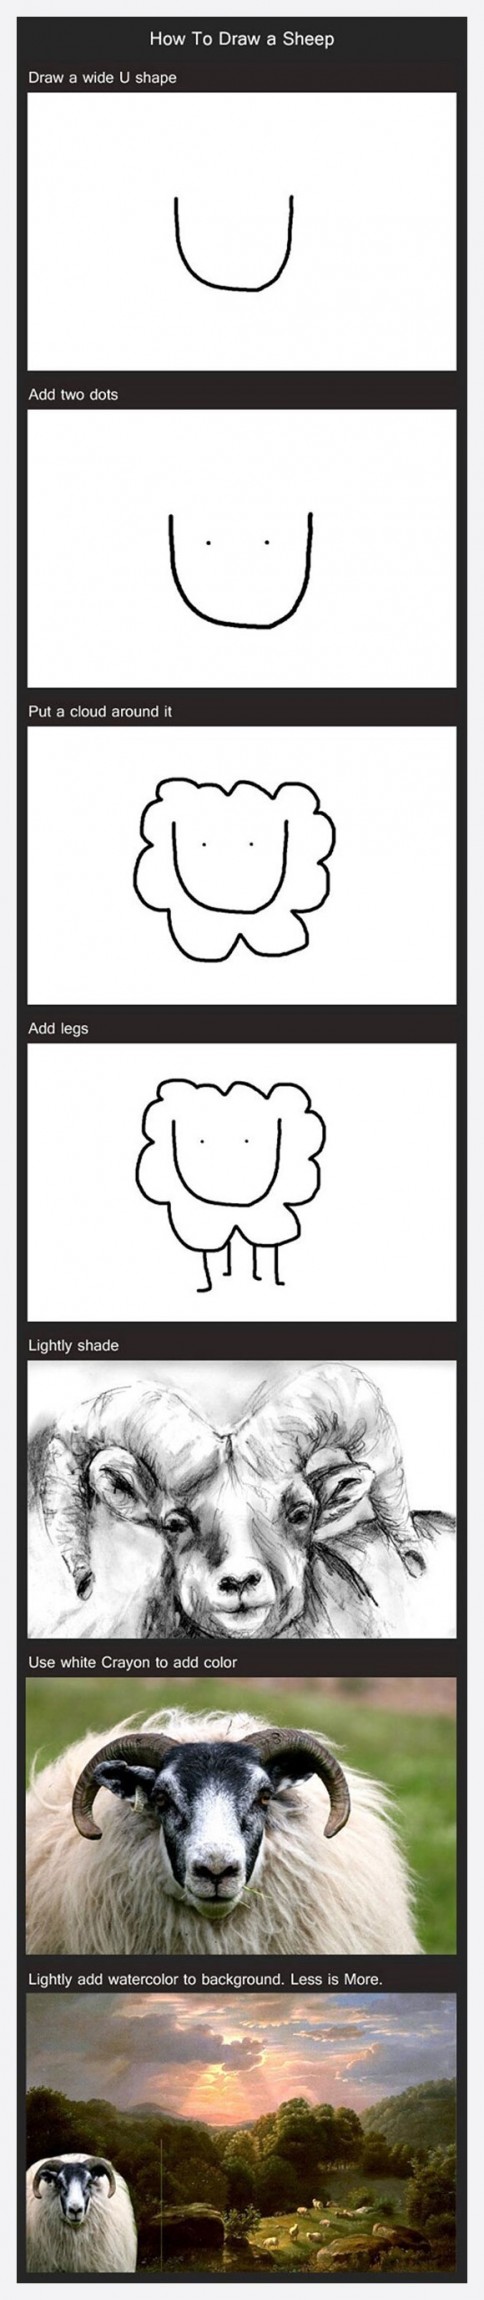 How-To-Draw-Sheep-picture1071